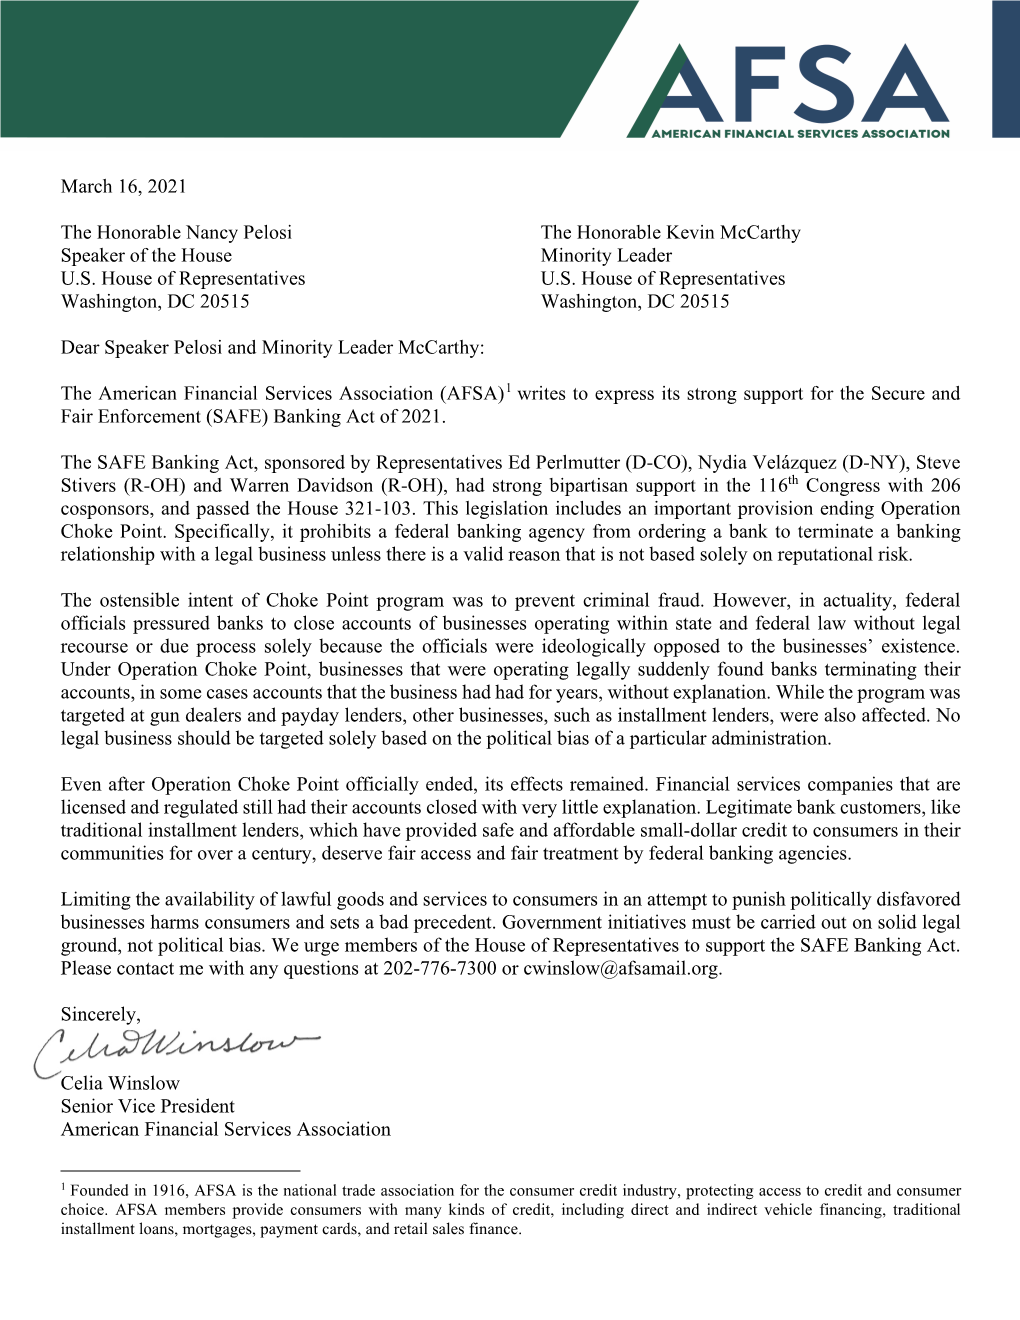 AFSA Letter Supporting SAFE Banking